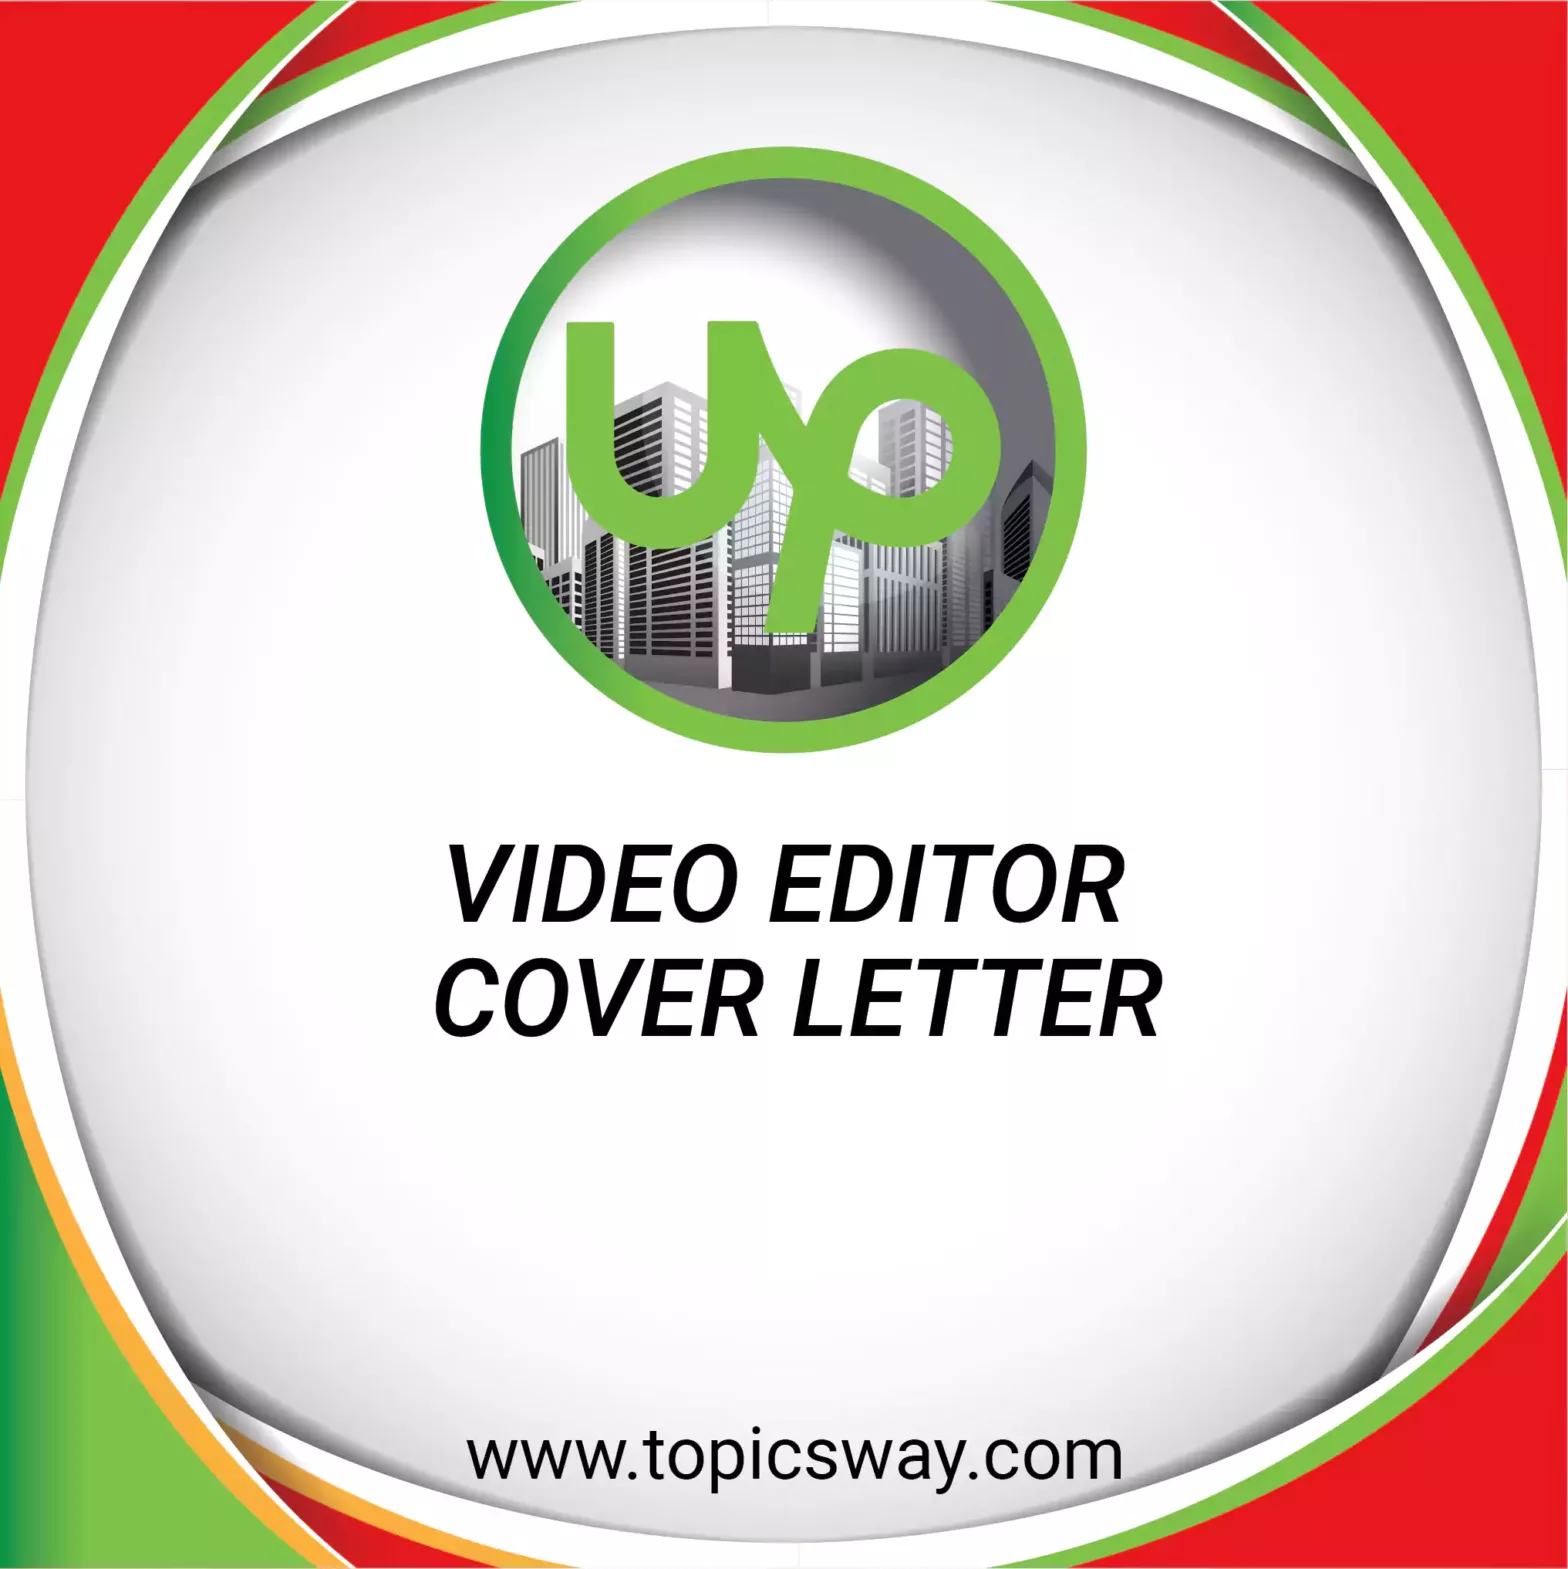 VIDEO EDITOR- COVER LETTER